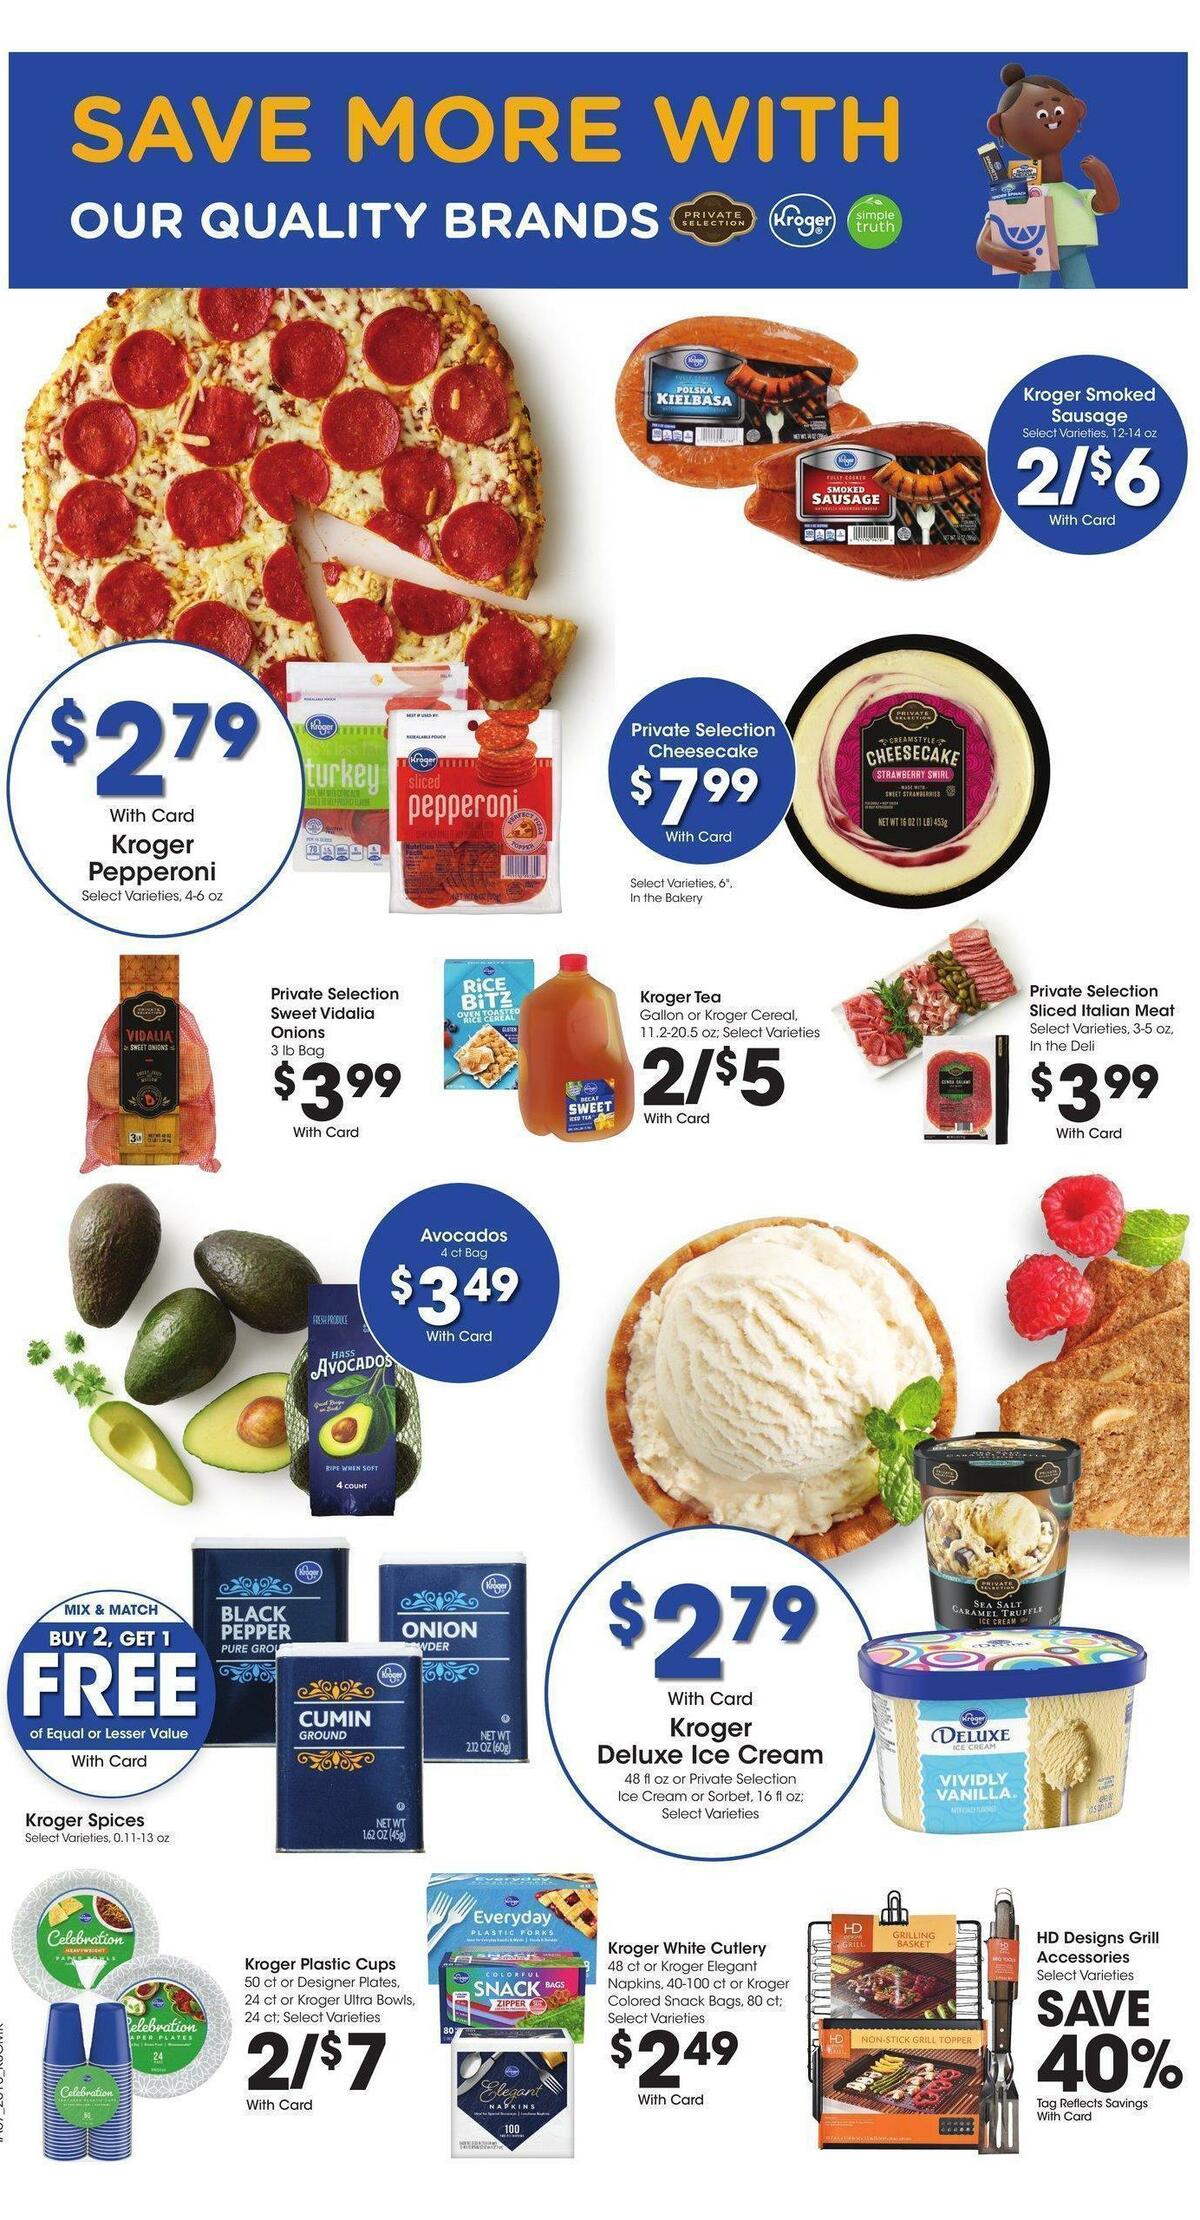 City Market Weekly Ad from May 31